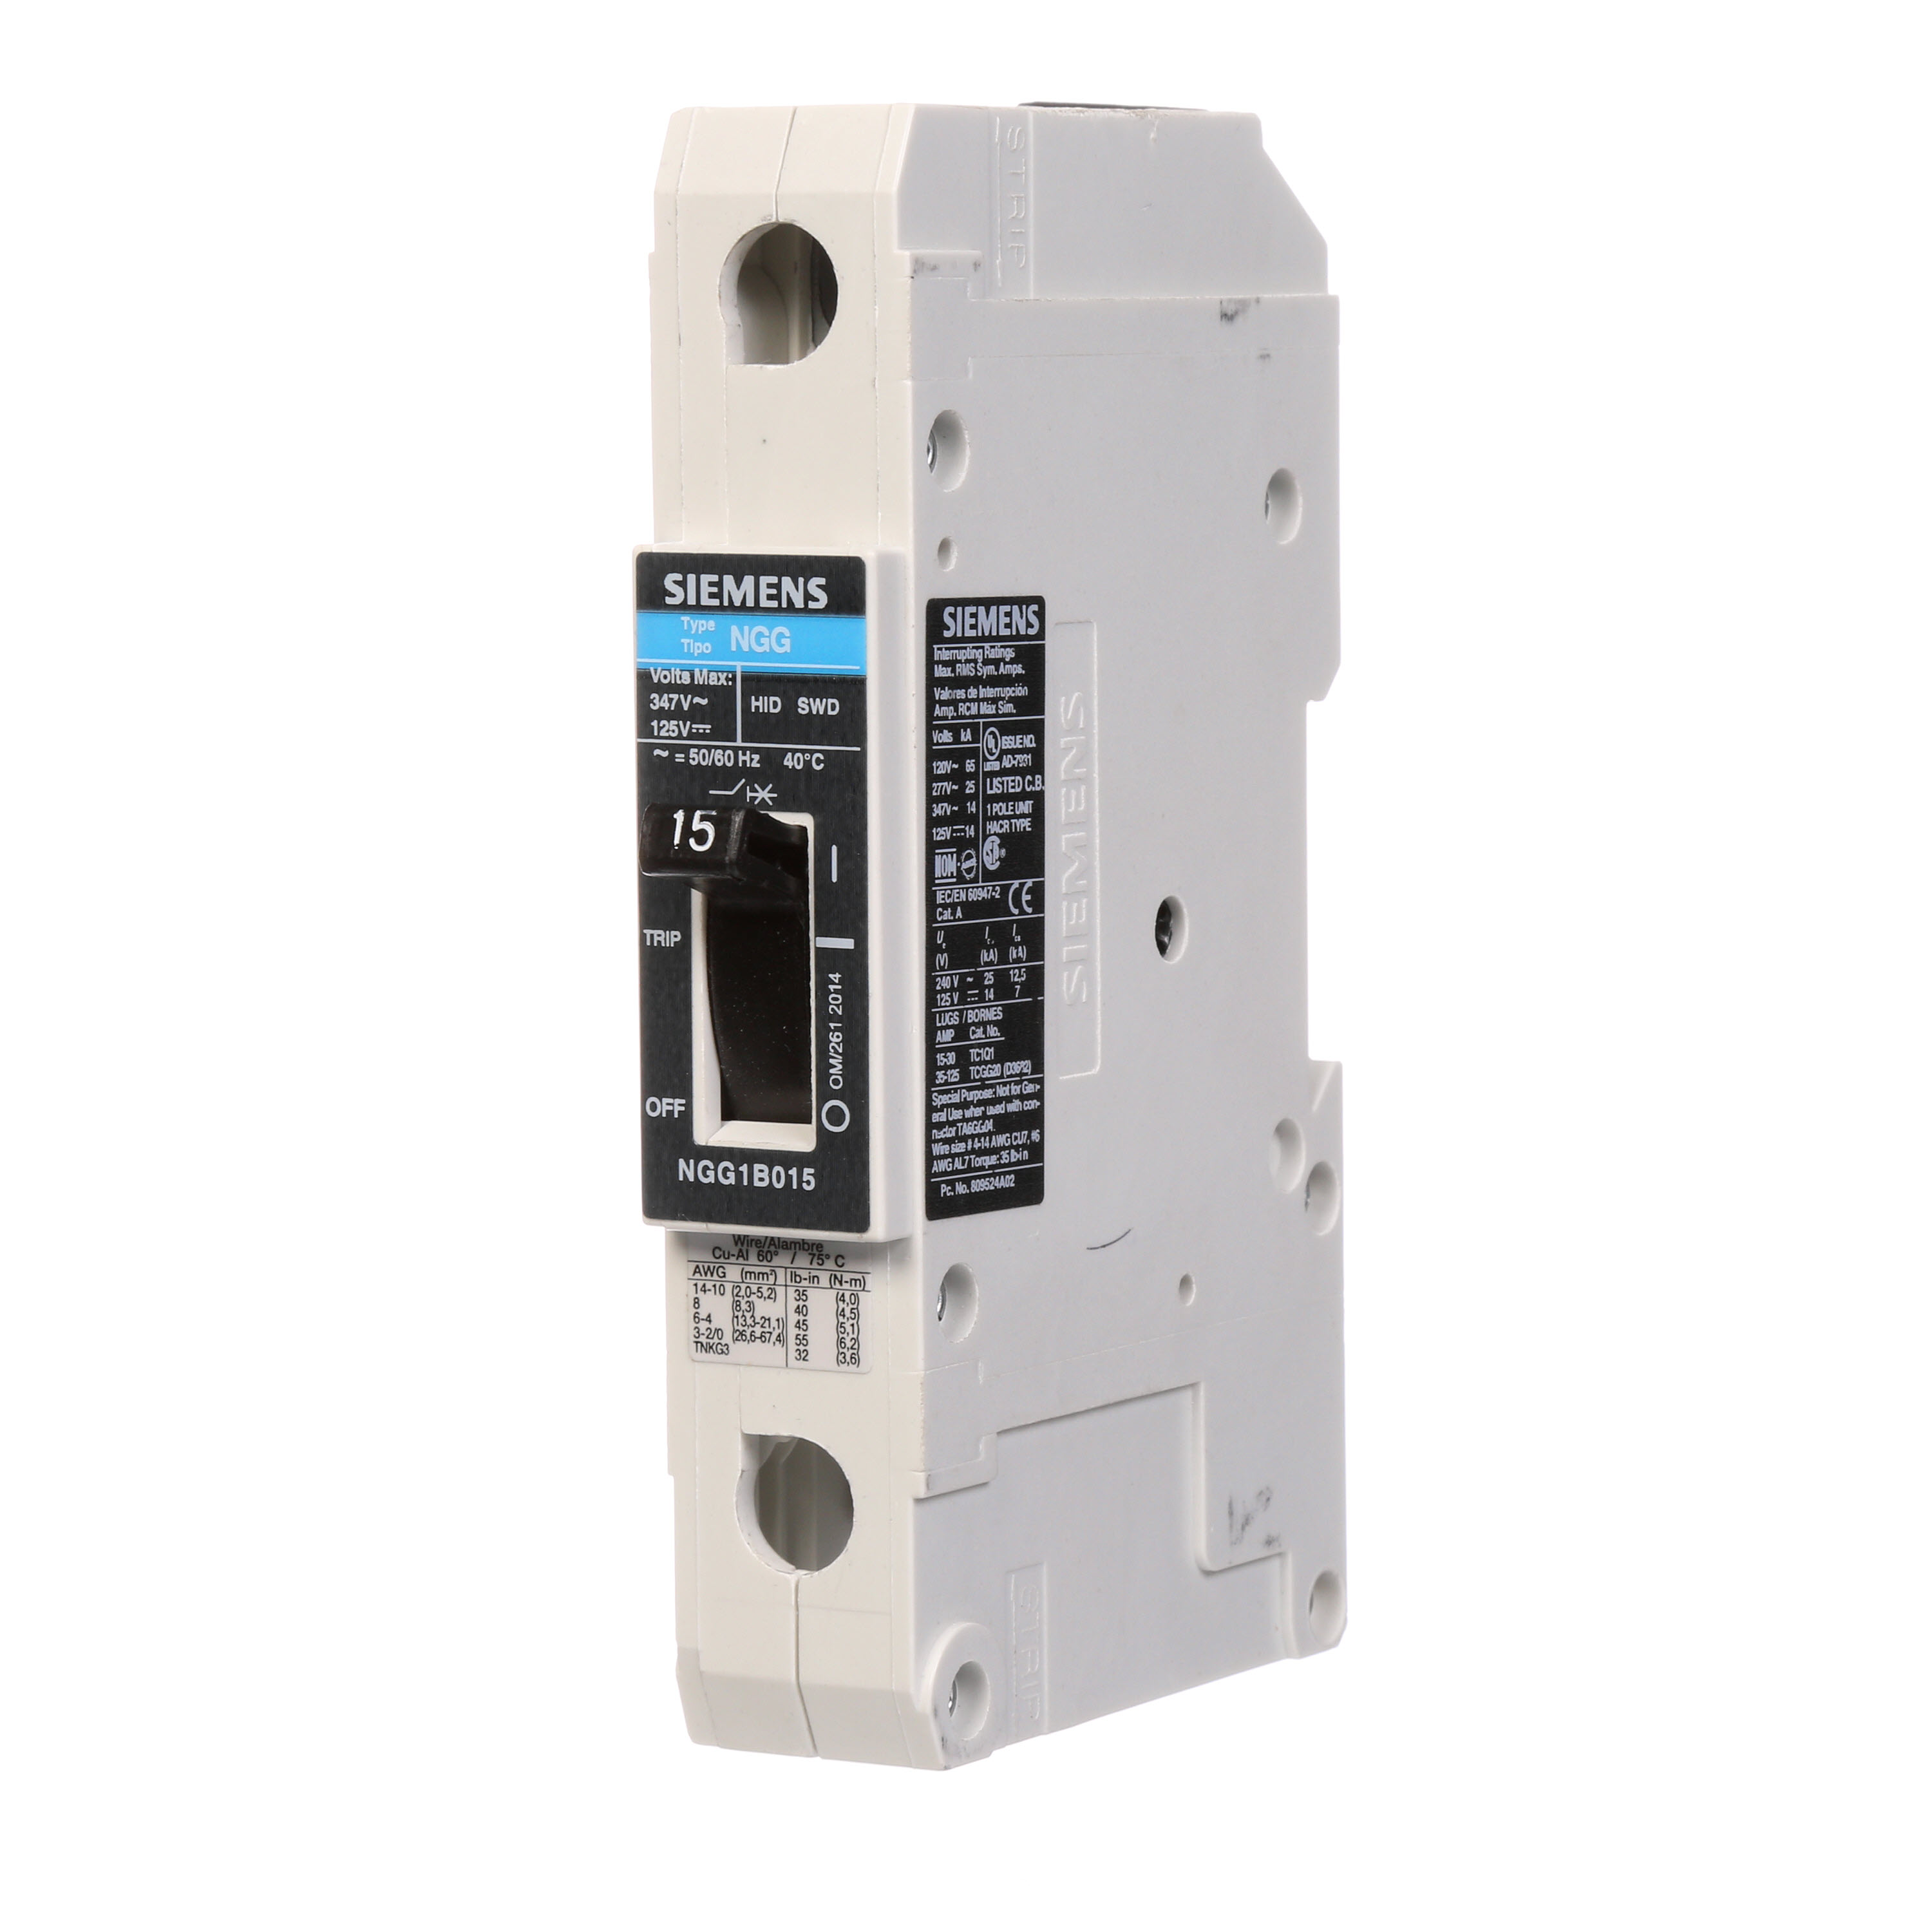 SIEMENS LOW VOLTAGE G FRAME CIRCUIT BREAKER WITH THERMAL - MAGNETIC TRIP. UL LISTED NGG FRAME WITH STANDARD BREAKING CAPACITY. 15A 1-POLE (14KAIC AT 347V) (25KAIC AT 277V). SPECIAL FEATURES MOUNTS ON DIN RAIL / SCREW, LINE AND LOAD SIDE LUGS (TC1Q1) WIRE RANGE 14 - 10 AWS (CU/AL). DIMENSIONS (W x H x D) IN 1 x 5.4 x 2.8.